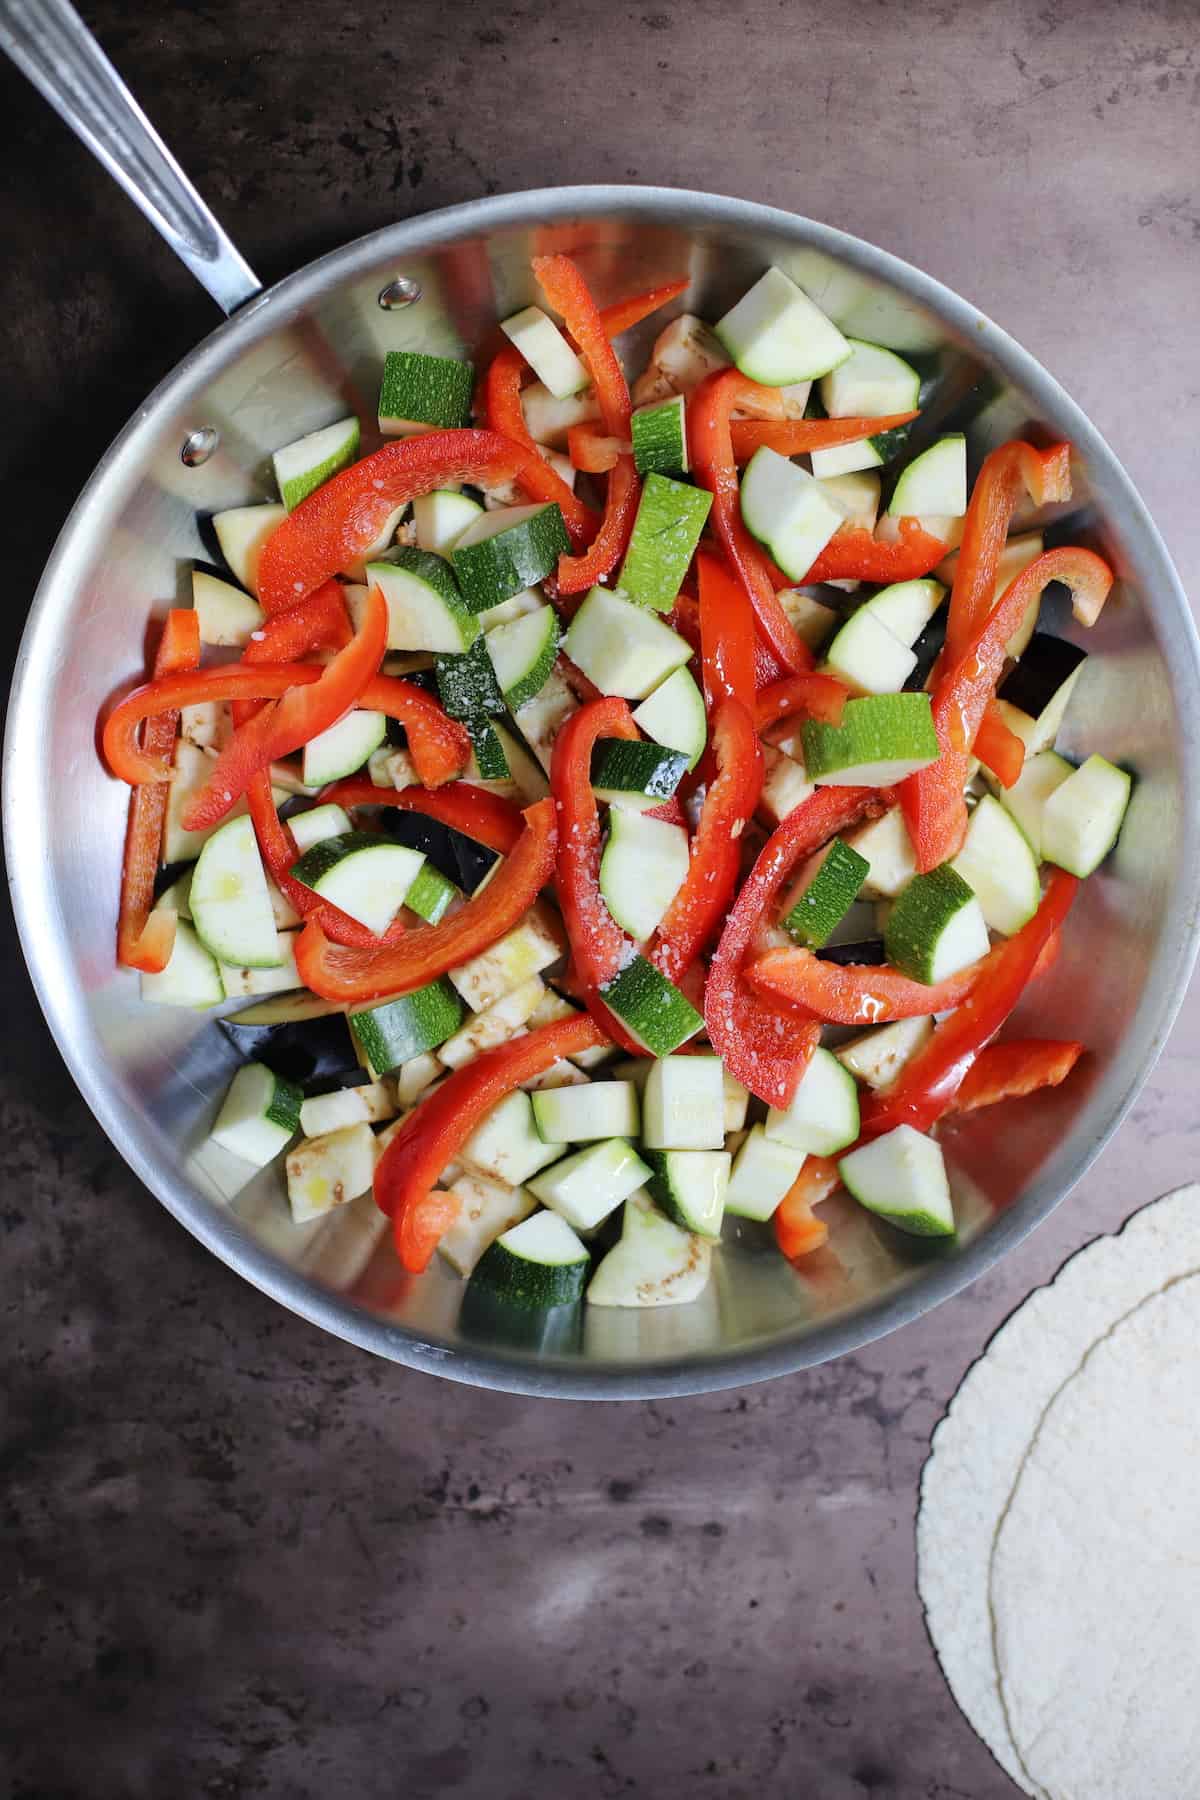 Raw vegetables in aluminum pan with tortillas on side.